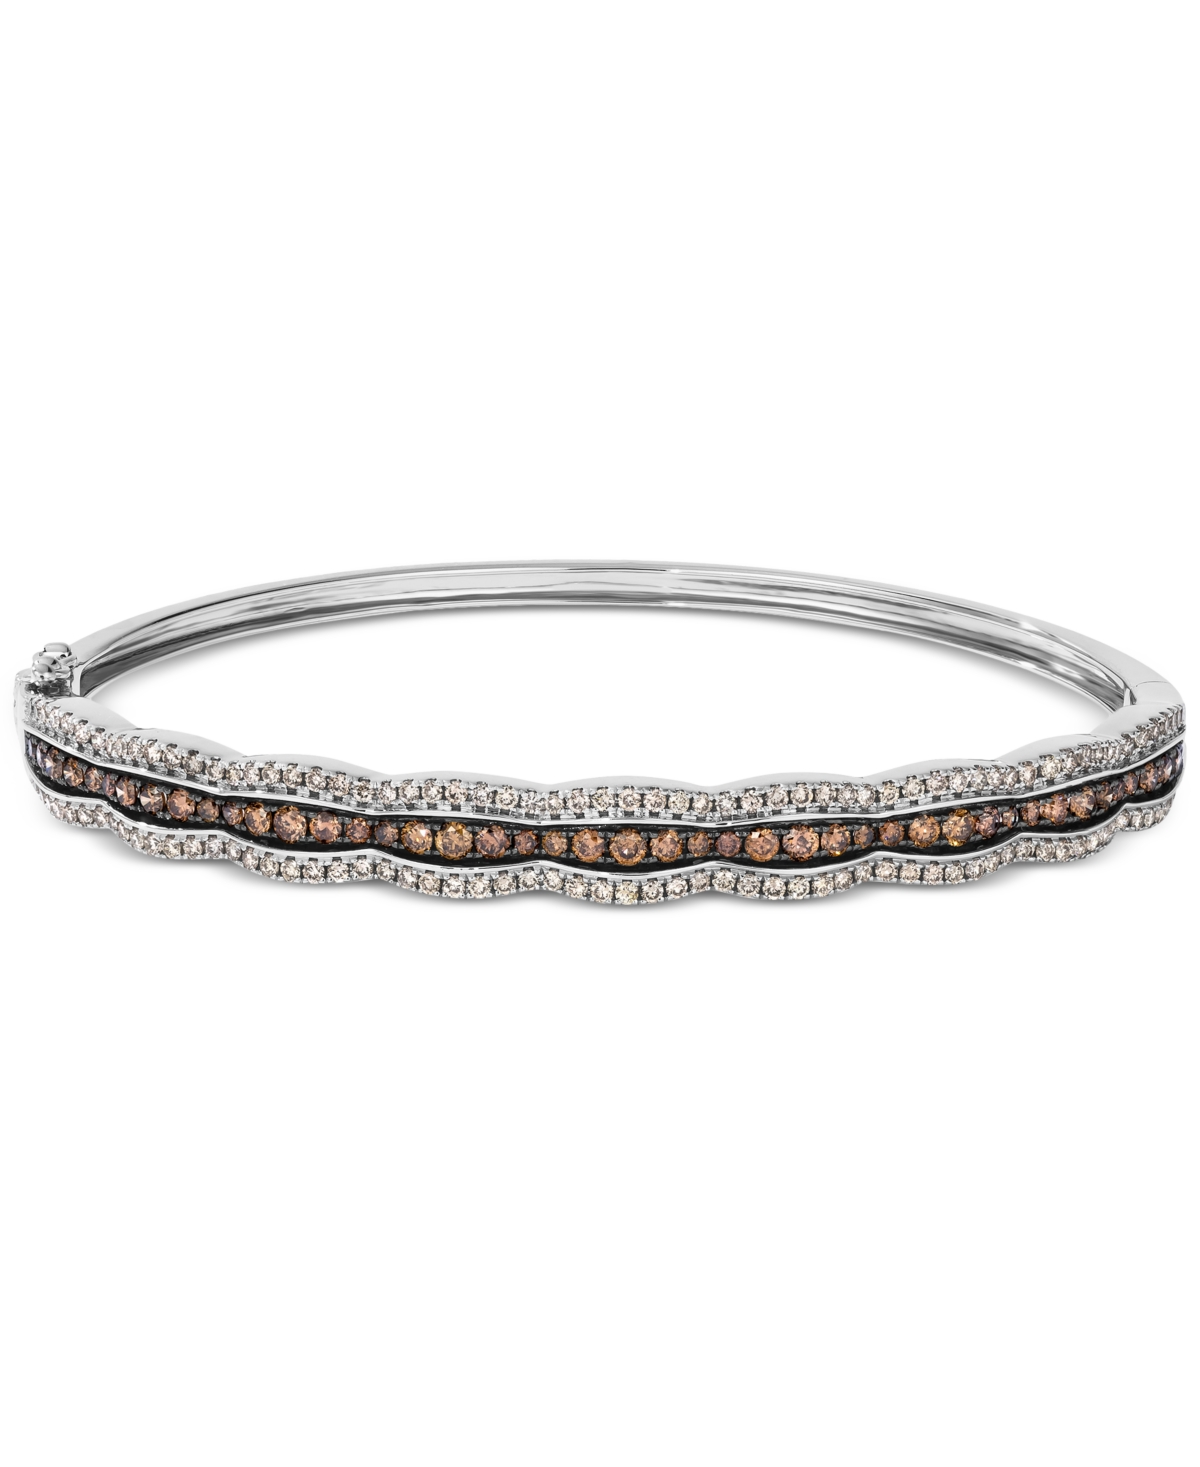 Chocolate Diamond & Nude Diamond Scalloped Bangle Bracelet (1-7/8 ct. t.w.) in 14k White Gold (Also Available in Rose Gold and Yellow Gold) -